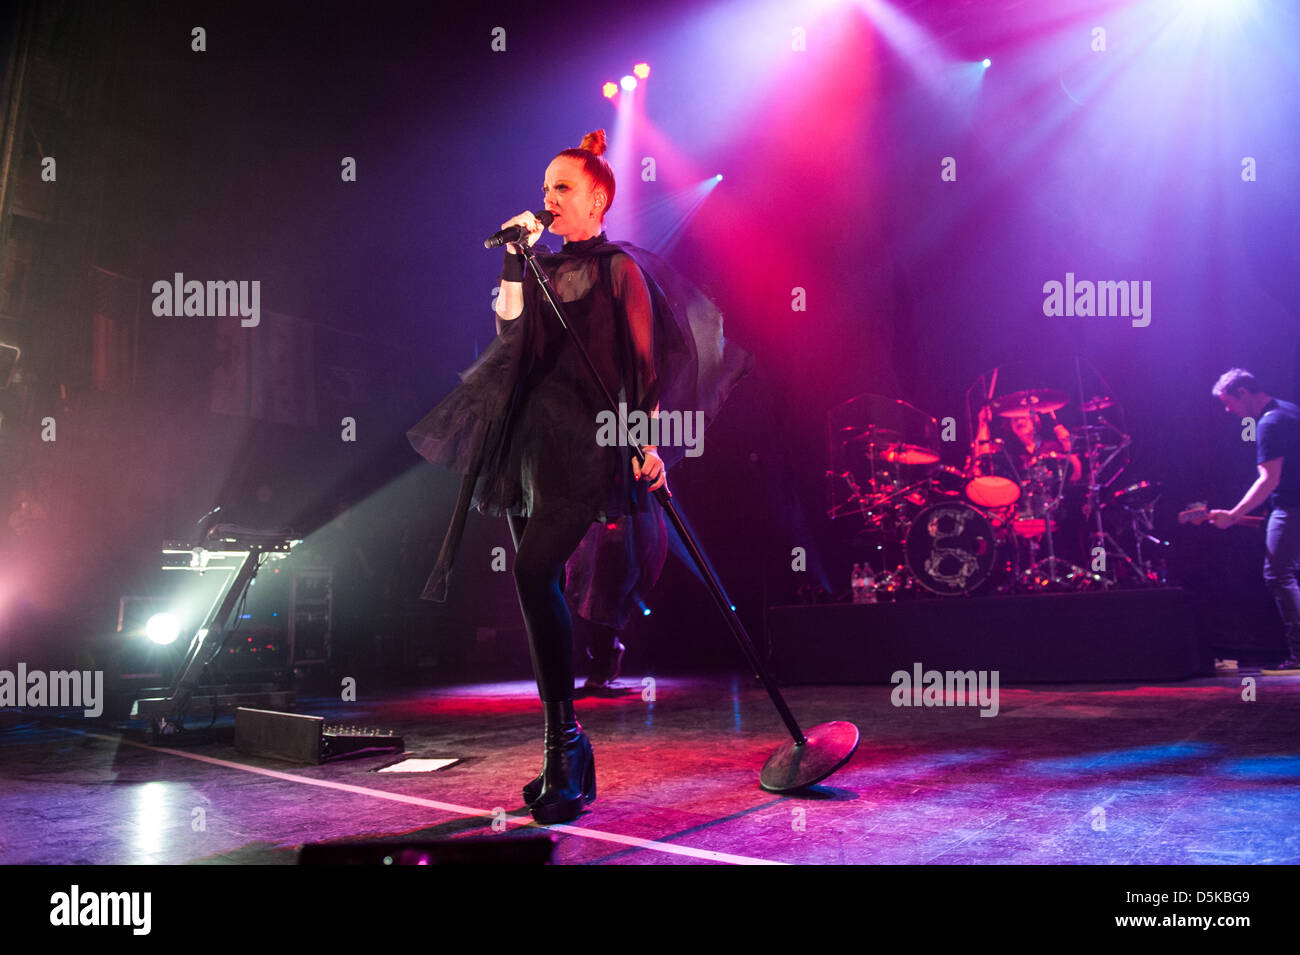 Chicago, USA. 3rd April, 2013. Alternative rock band Garbage performing at The Riviera Theatre in Chicago, USA. Credit: Max Herman/Alamy Live News Stock Photo